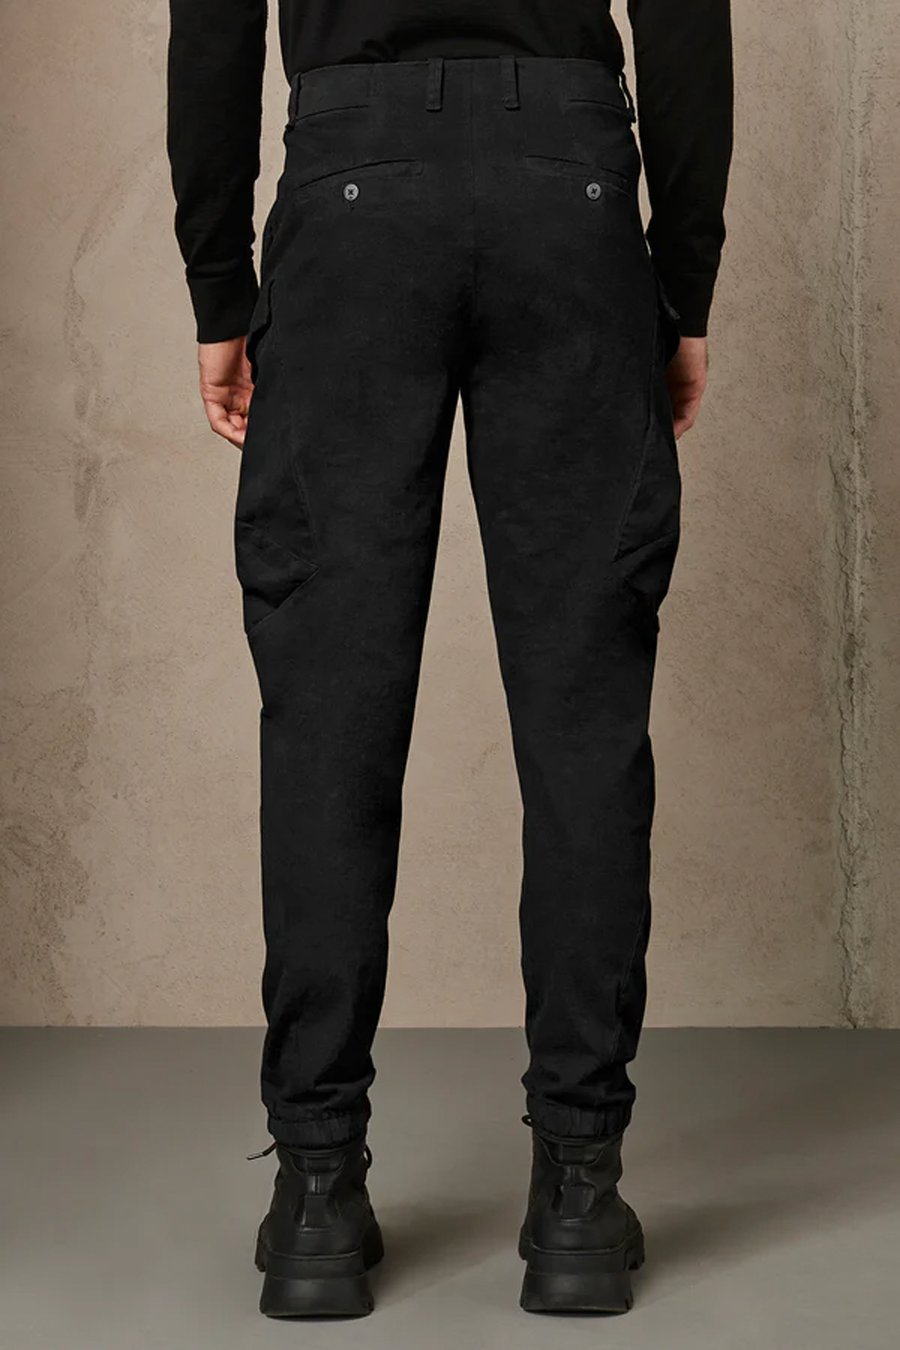 Buy the Transit Cotton/Wool Stretch Cargo Trousers Black at Intro. Spend £50 for free UK delivery. Official stockists. We ship worldwide.